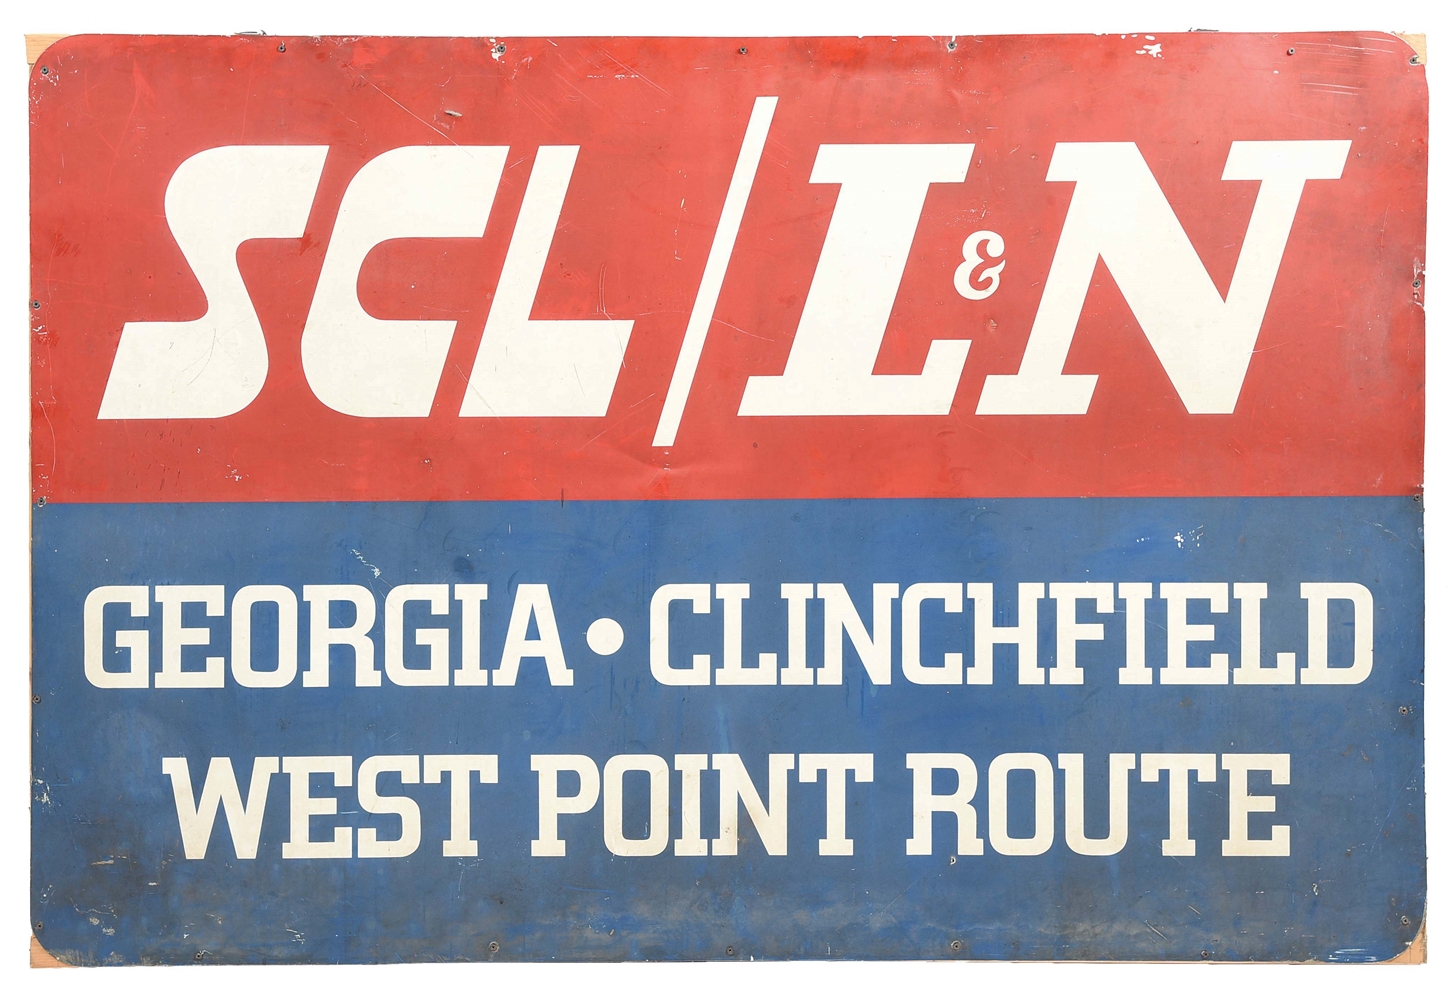 STEEL SCL/L&N SIGN.